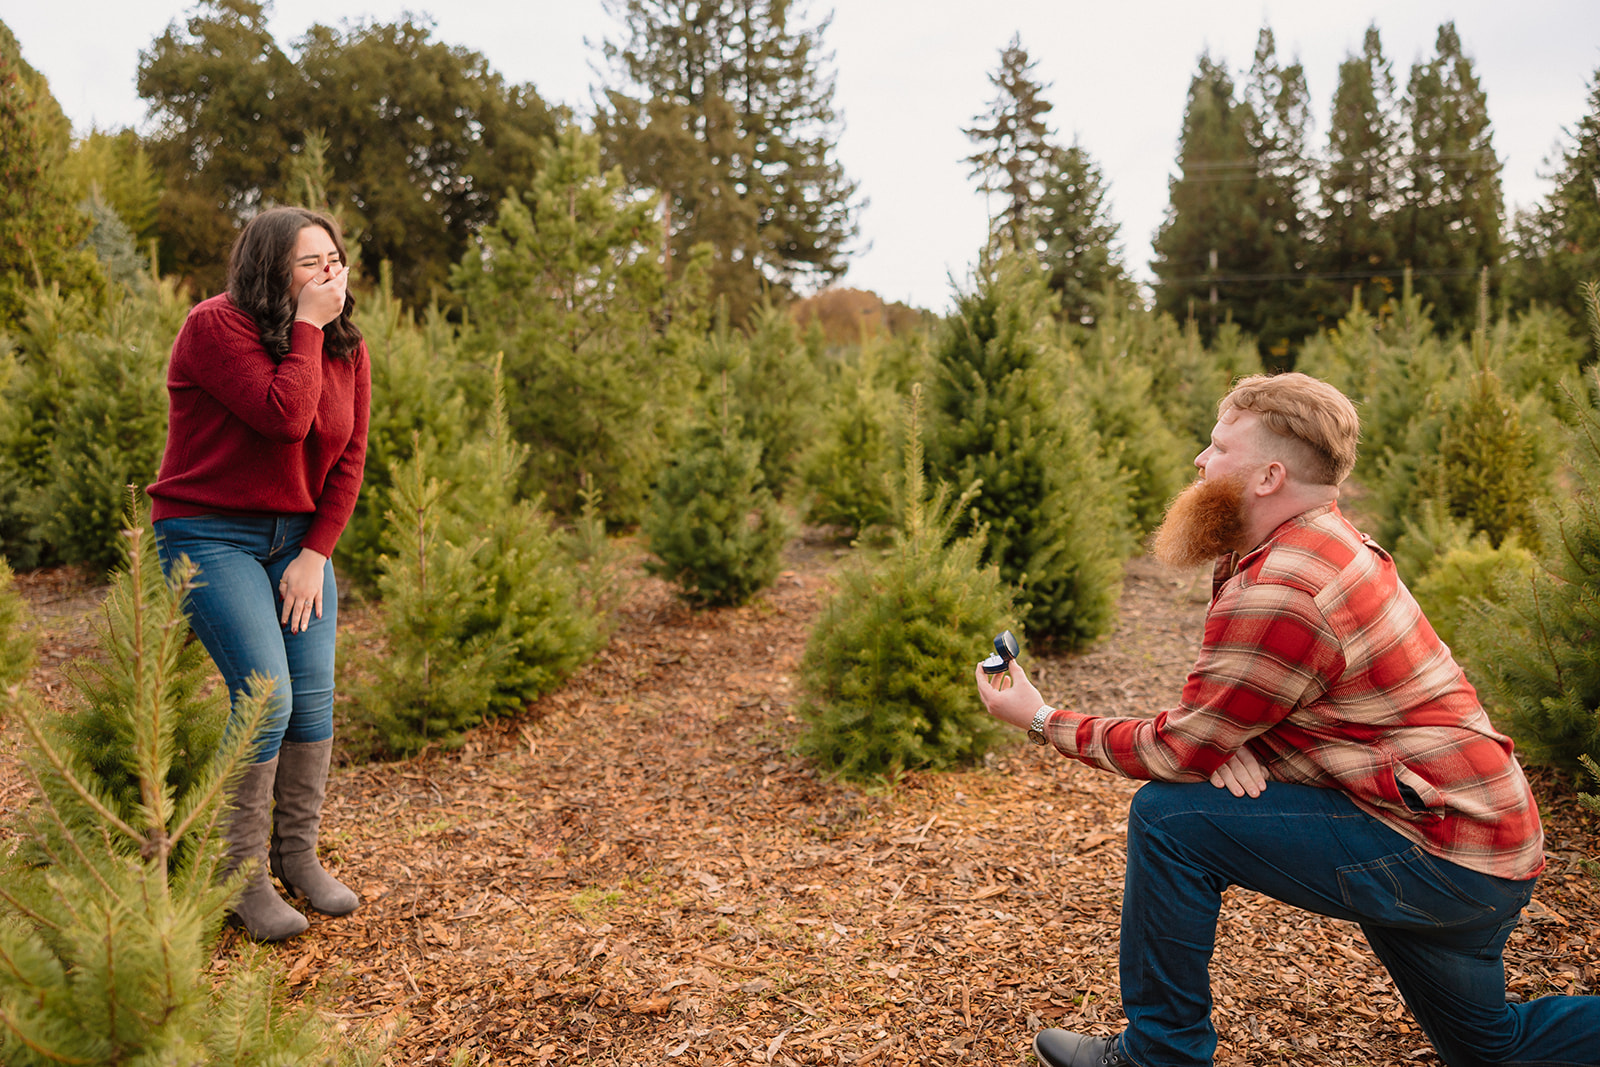 A Romantic Winter Proposal at a Christmas Tree Farm in California